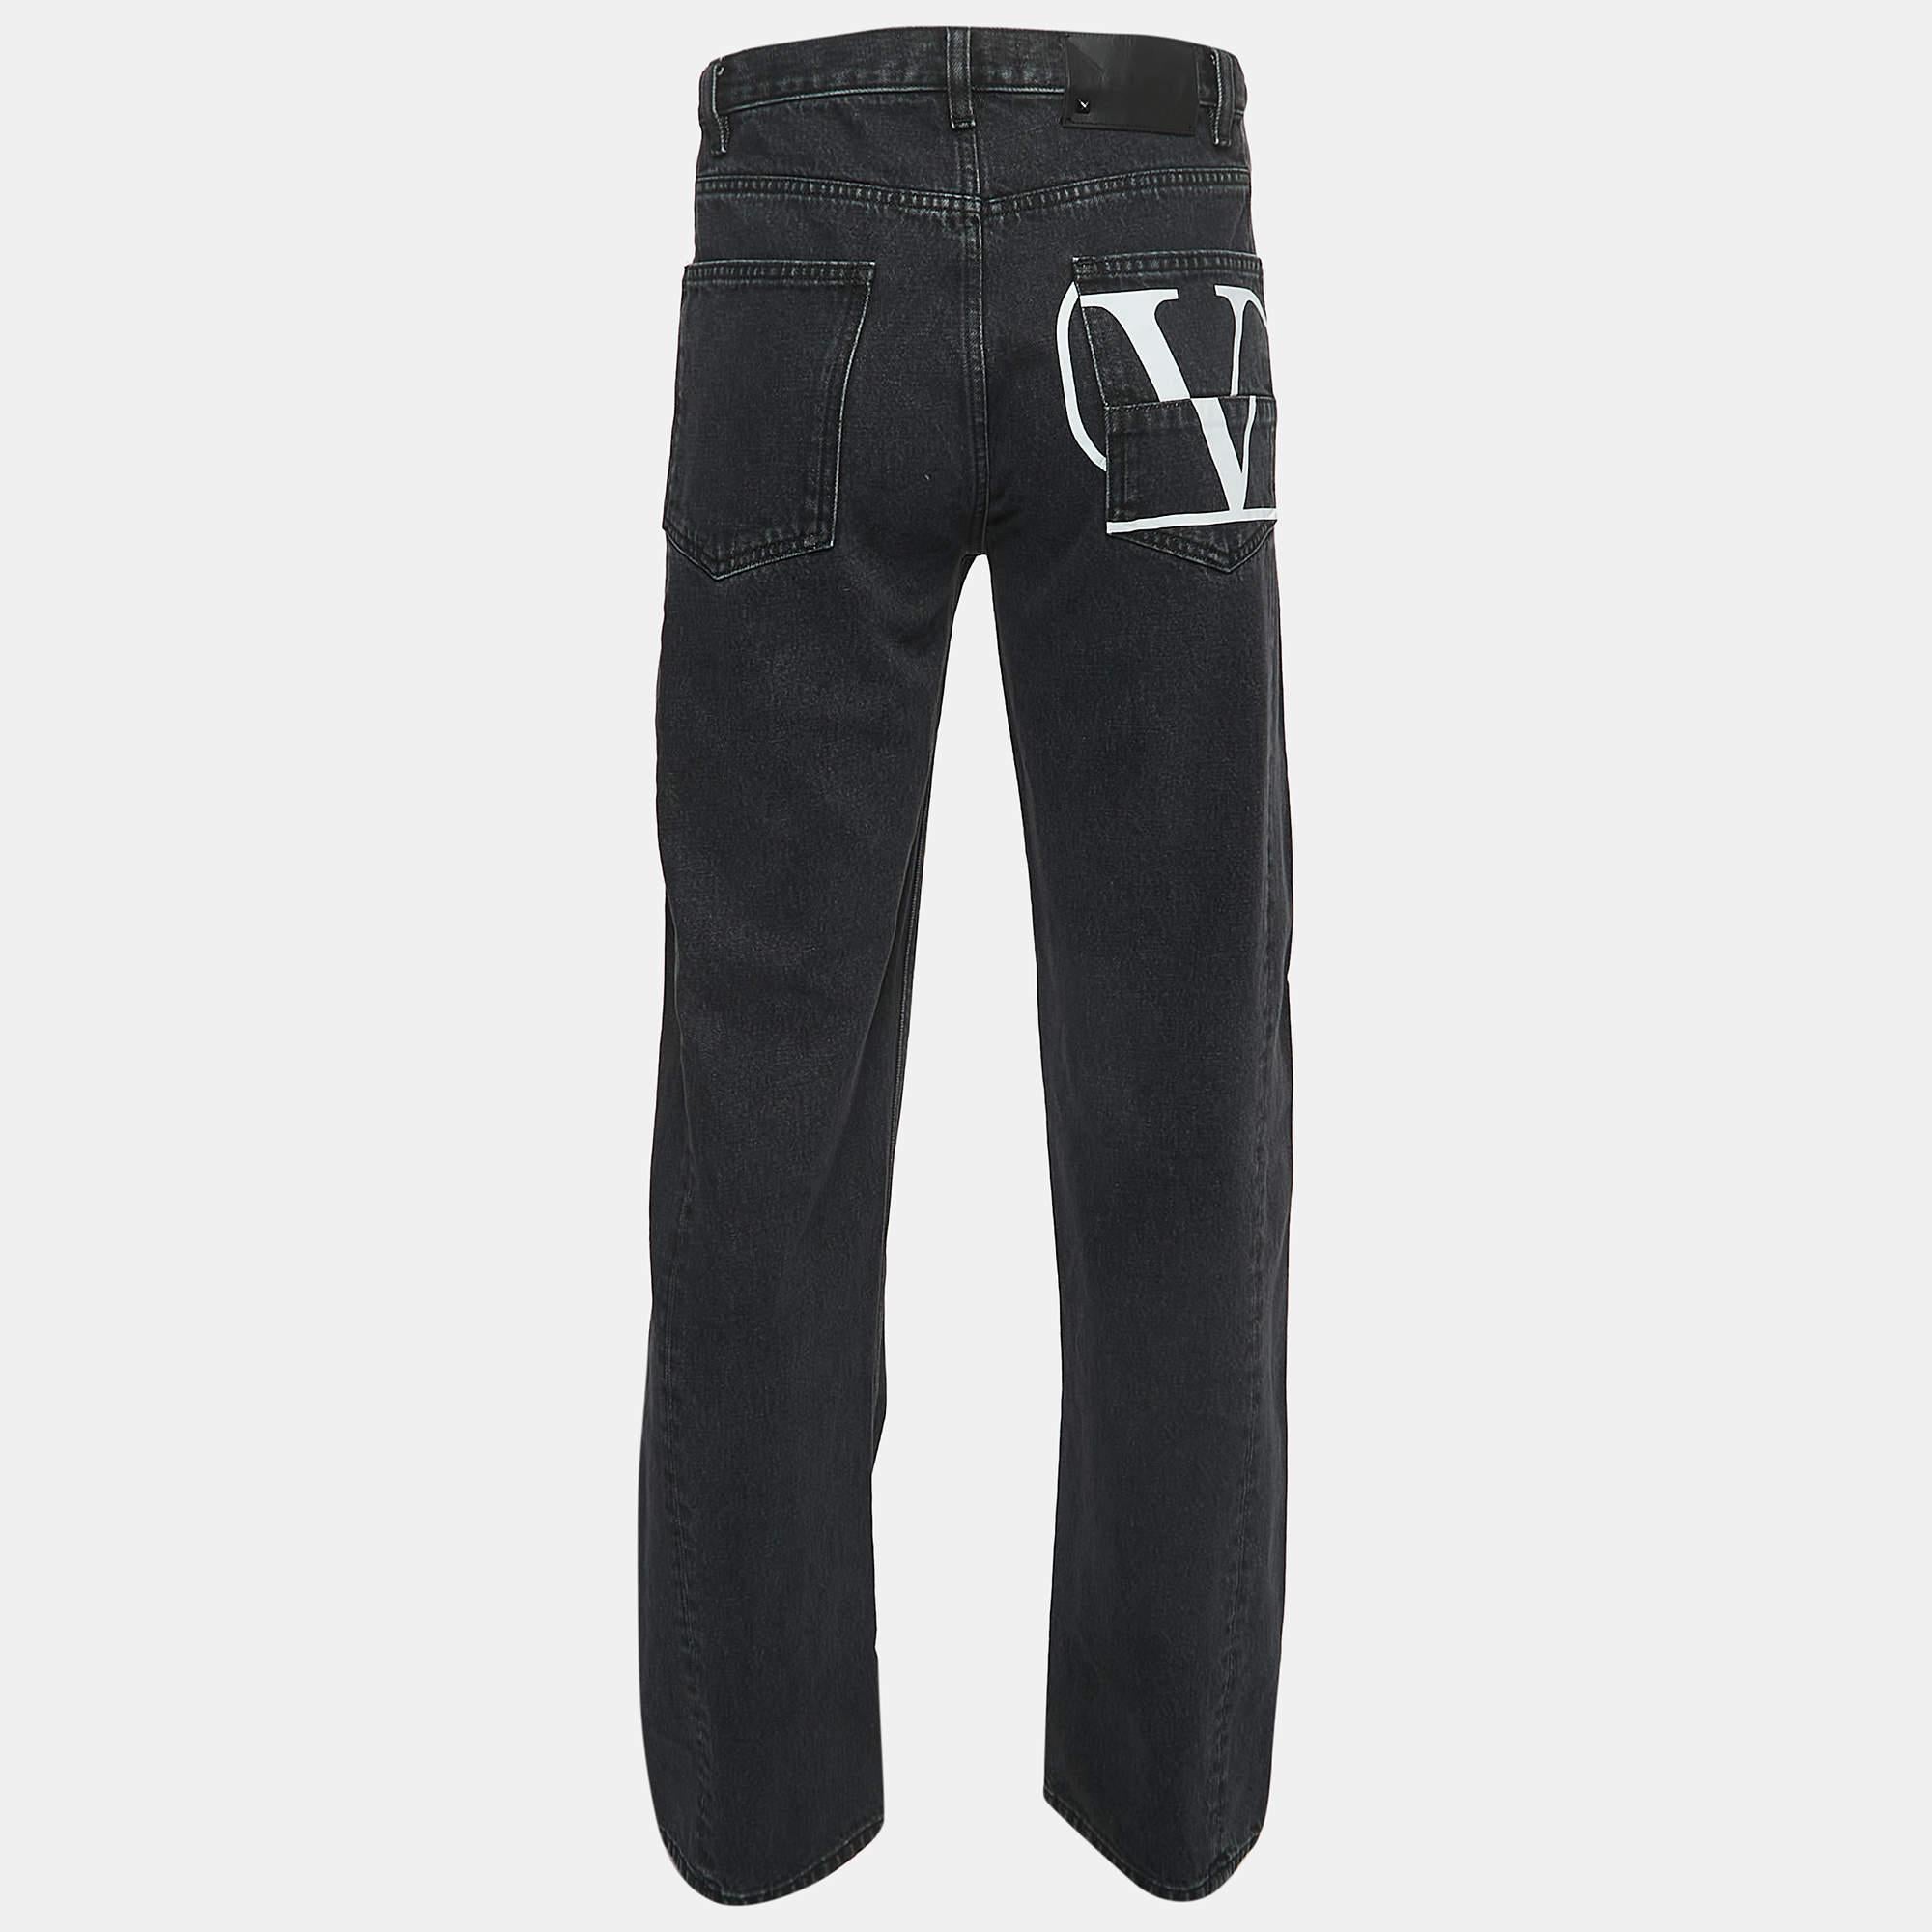 Step into style with these Valentino jeans. Crafted with precision, they offer the perfect blend of fashion and comfort, making them a must-have for any wardrobe.

